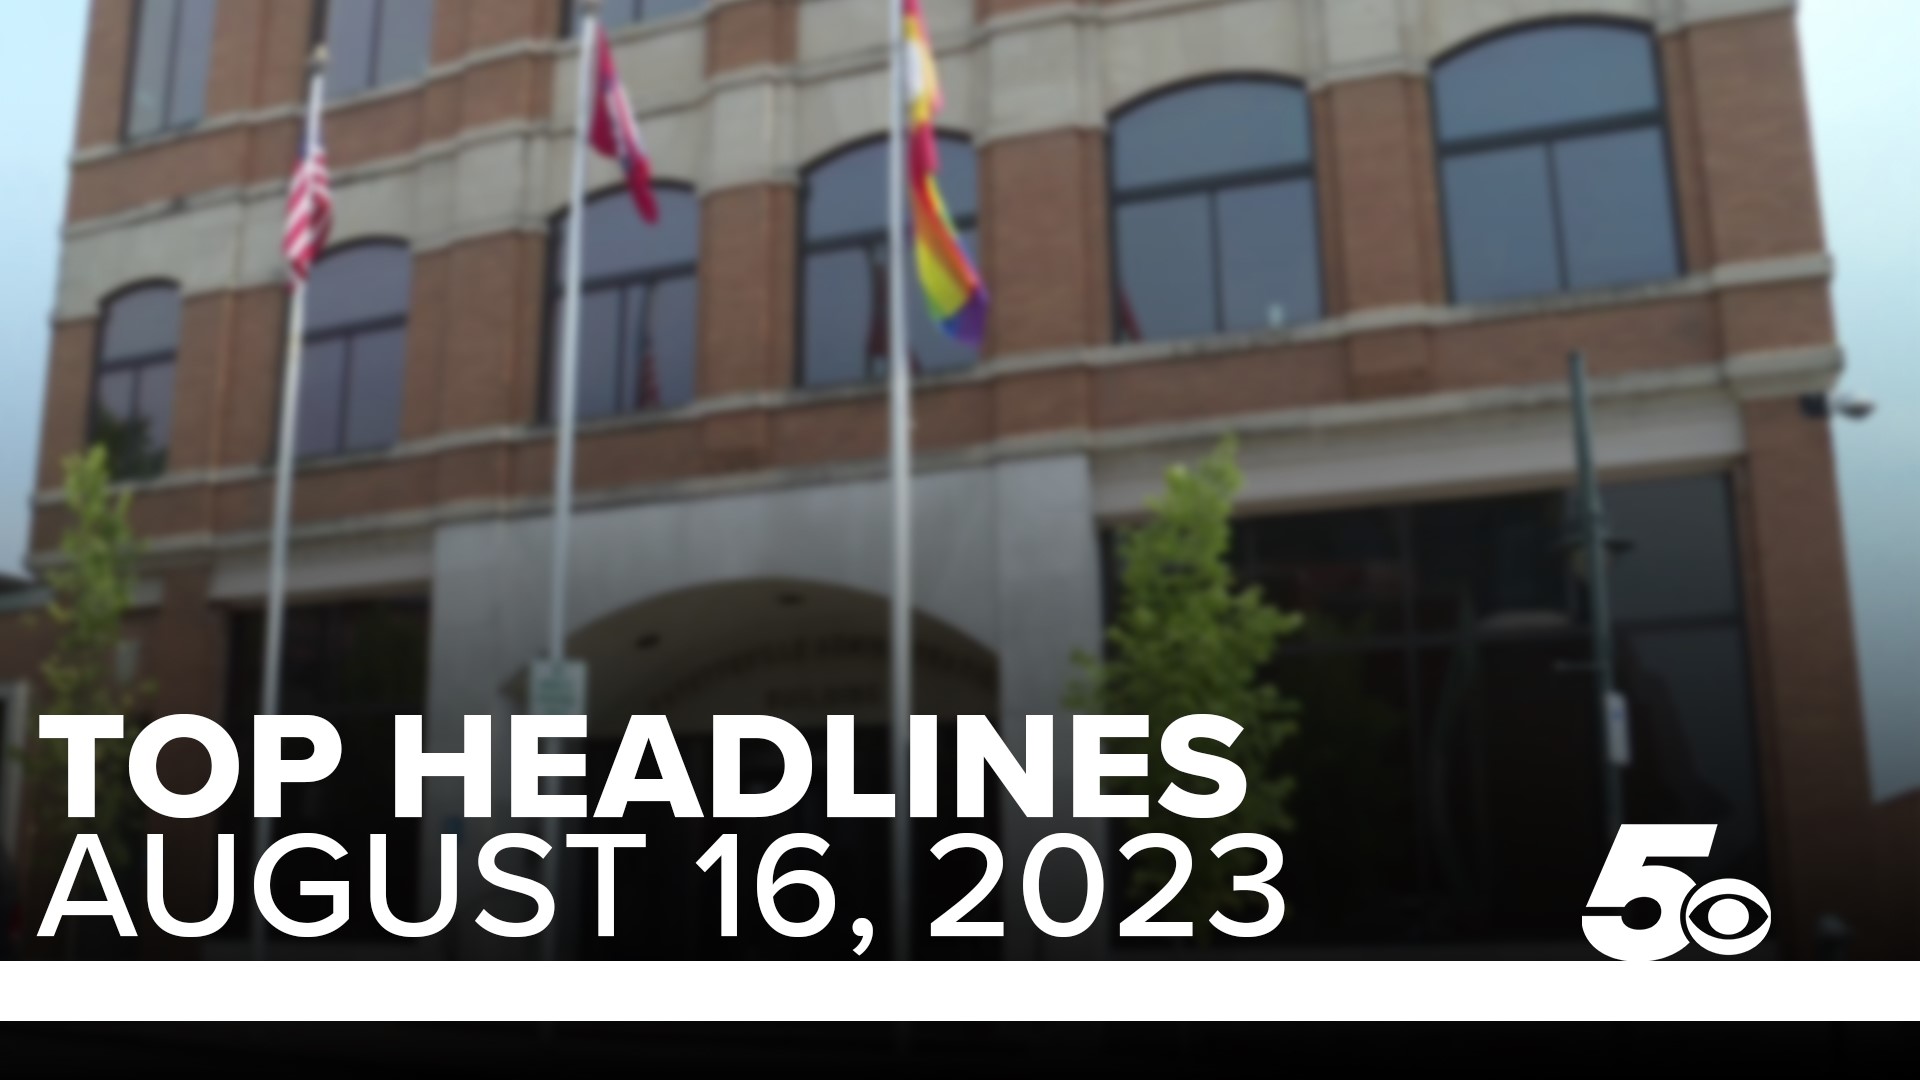 Top headlines for Northwest Arkansas and the River Valley for August 16, 2023.